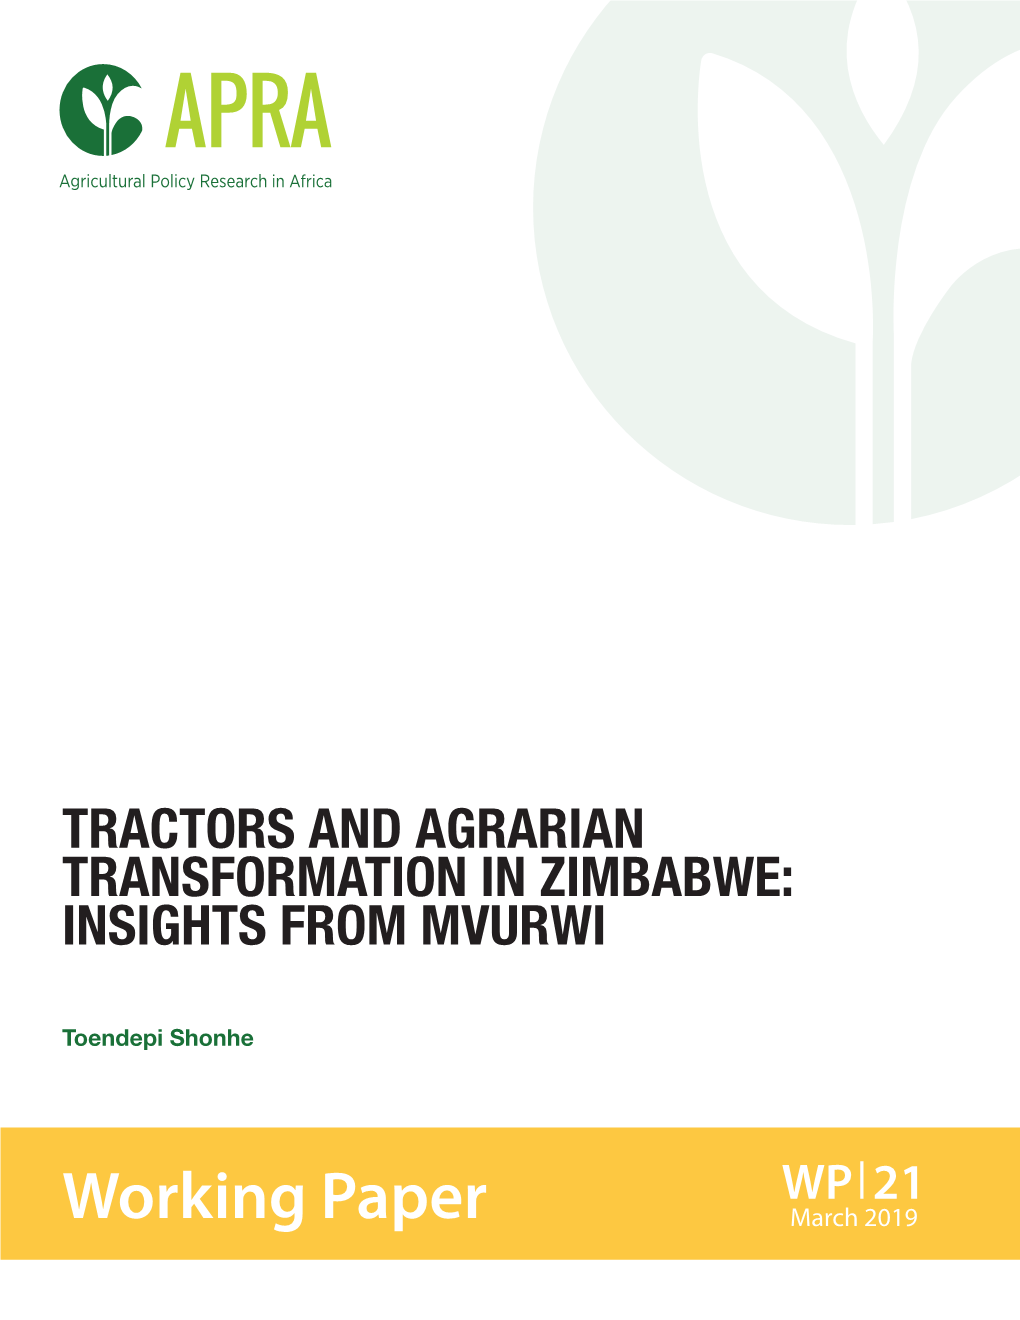 Tractors and Agrarian Transformation in Zimbabwe: Insights from Mvurwi